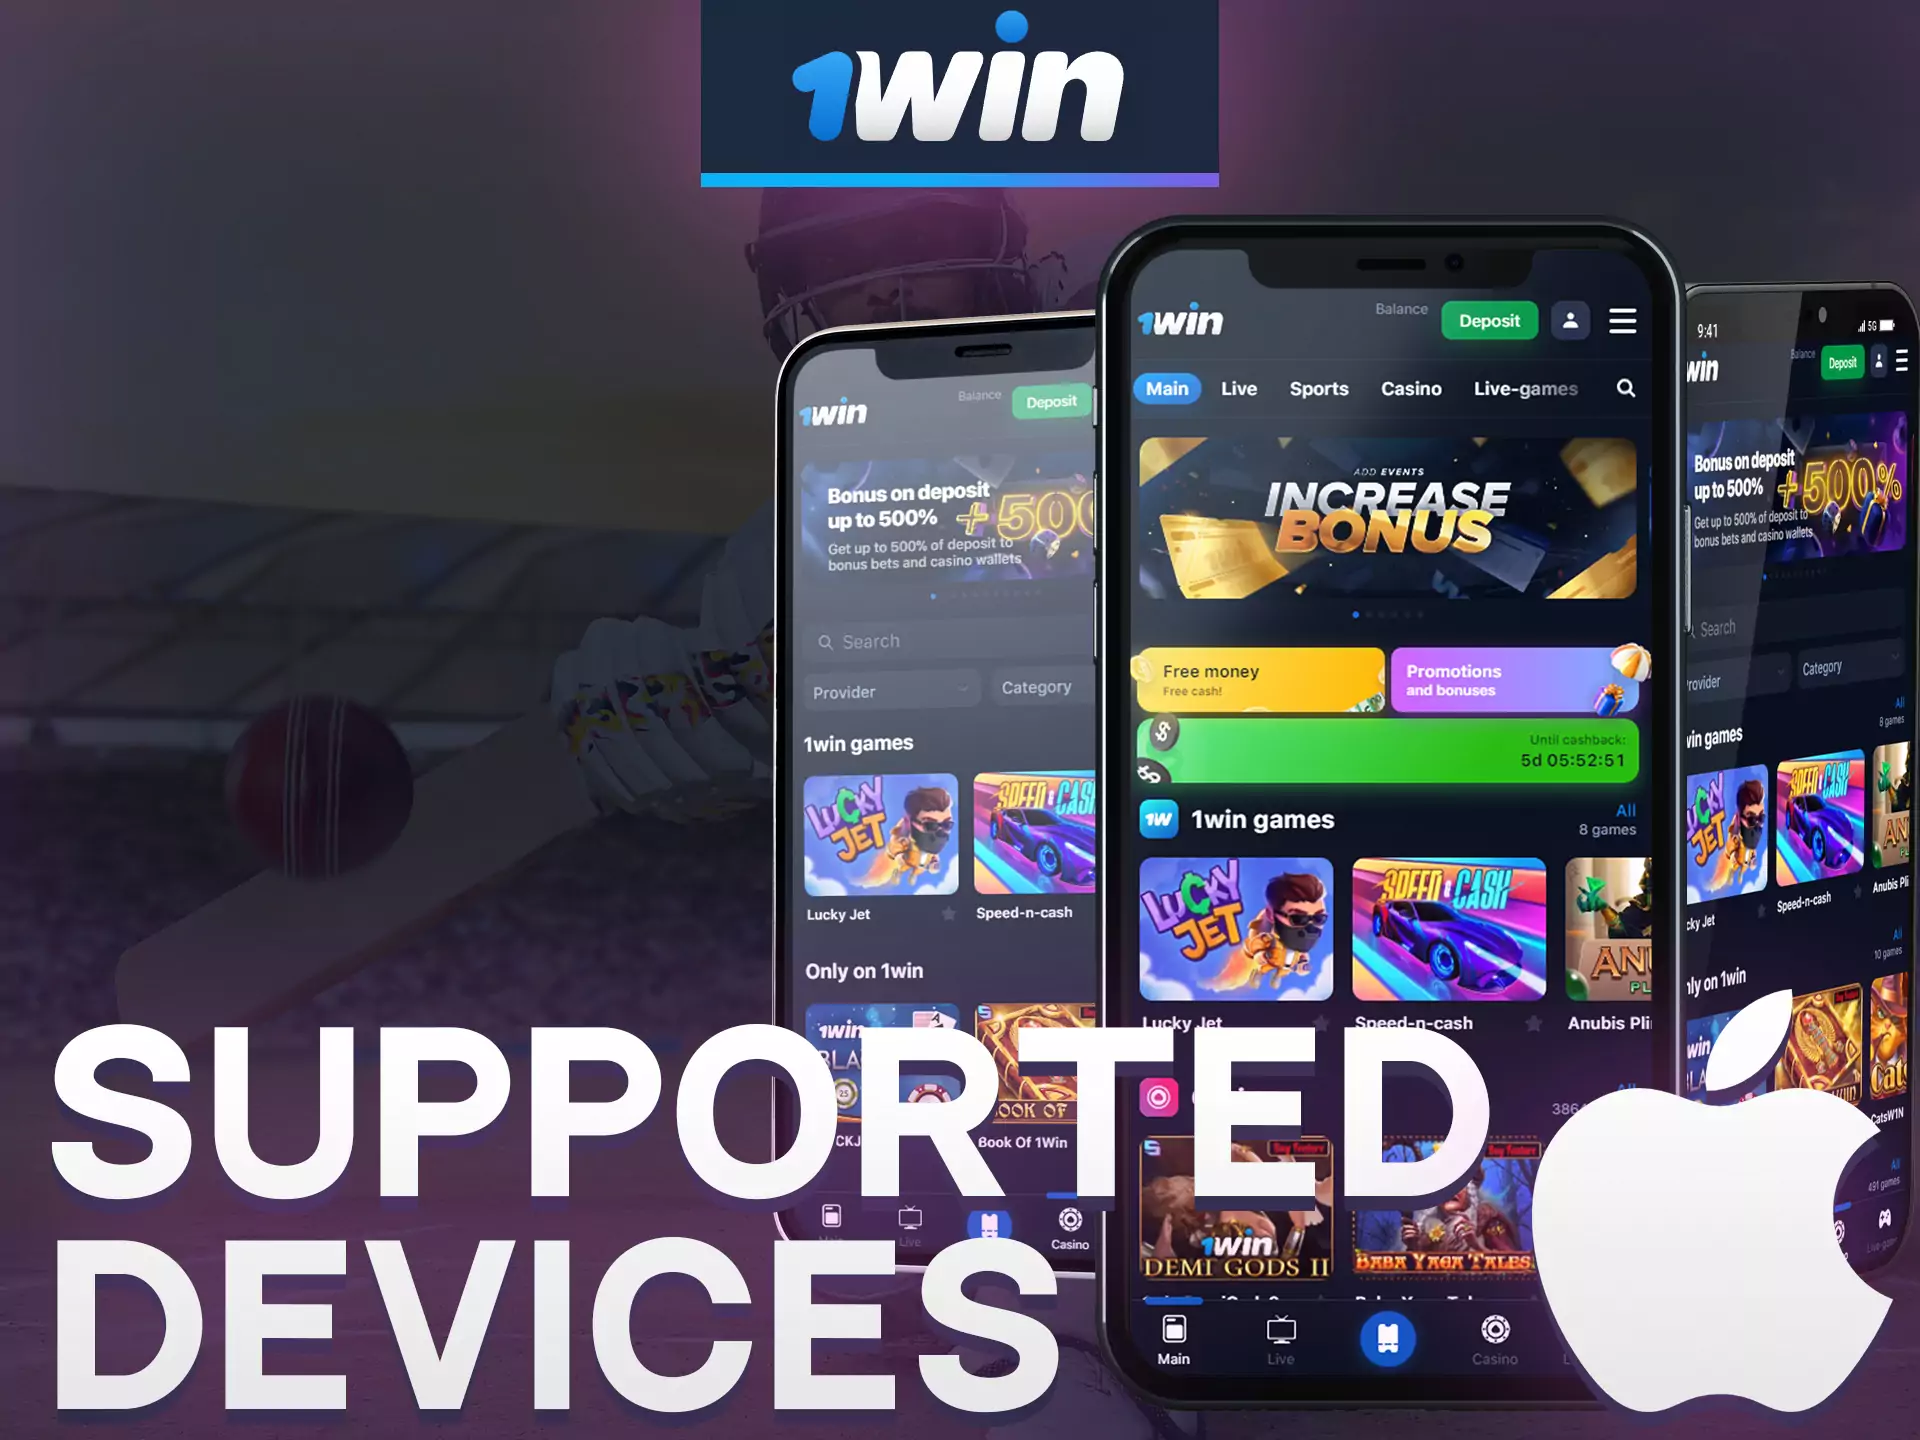 1win app supports any of iOS devices.